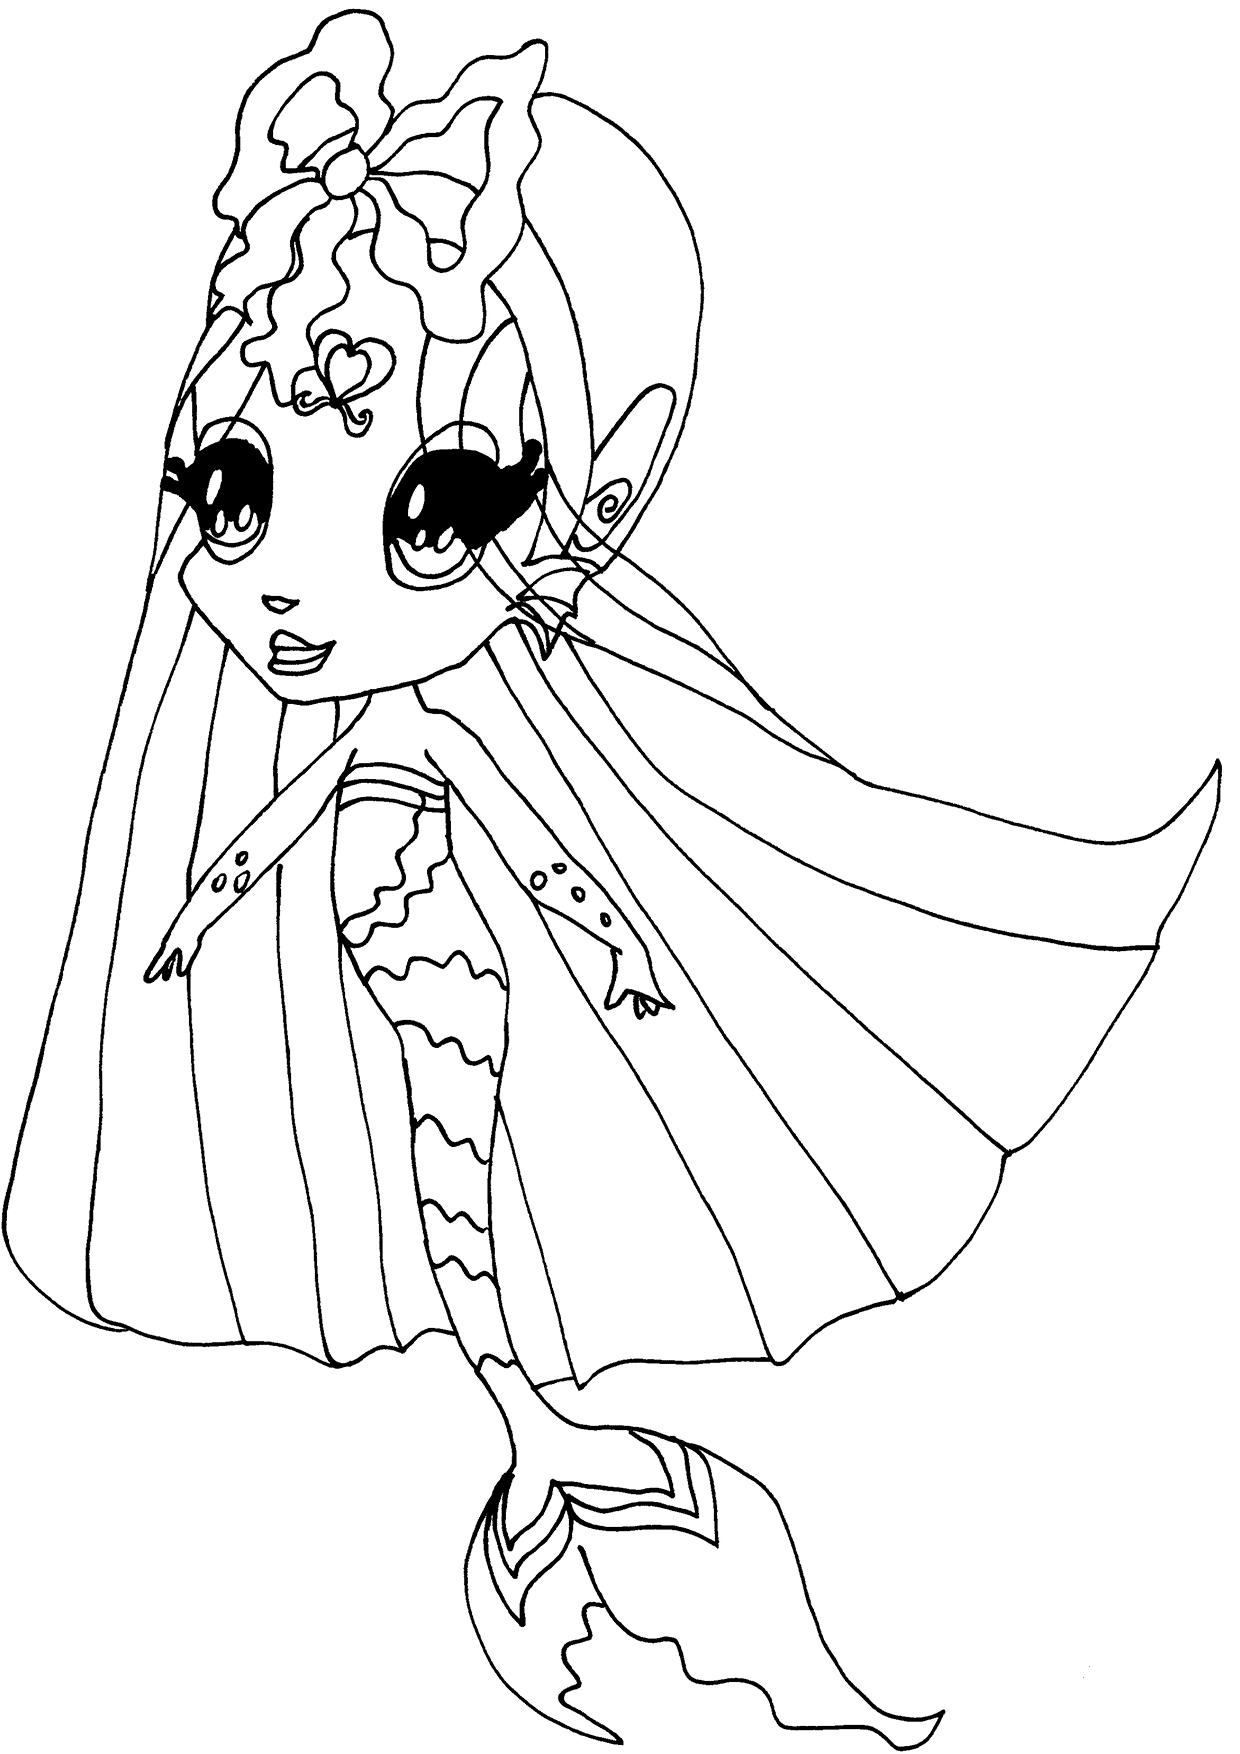 Winx Club Phylla Selkie coloring page - ColouringPages